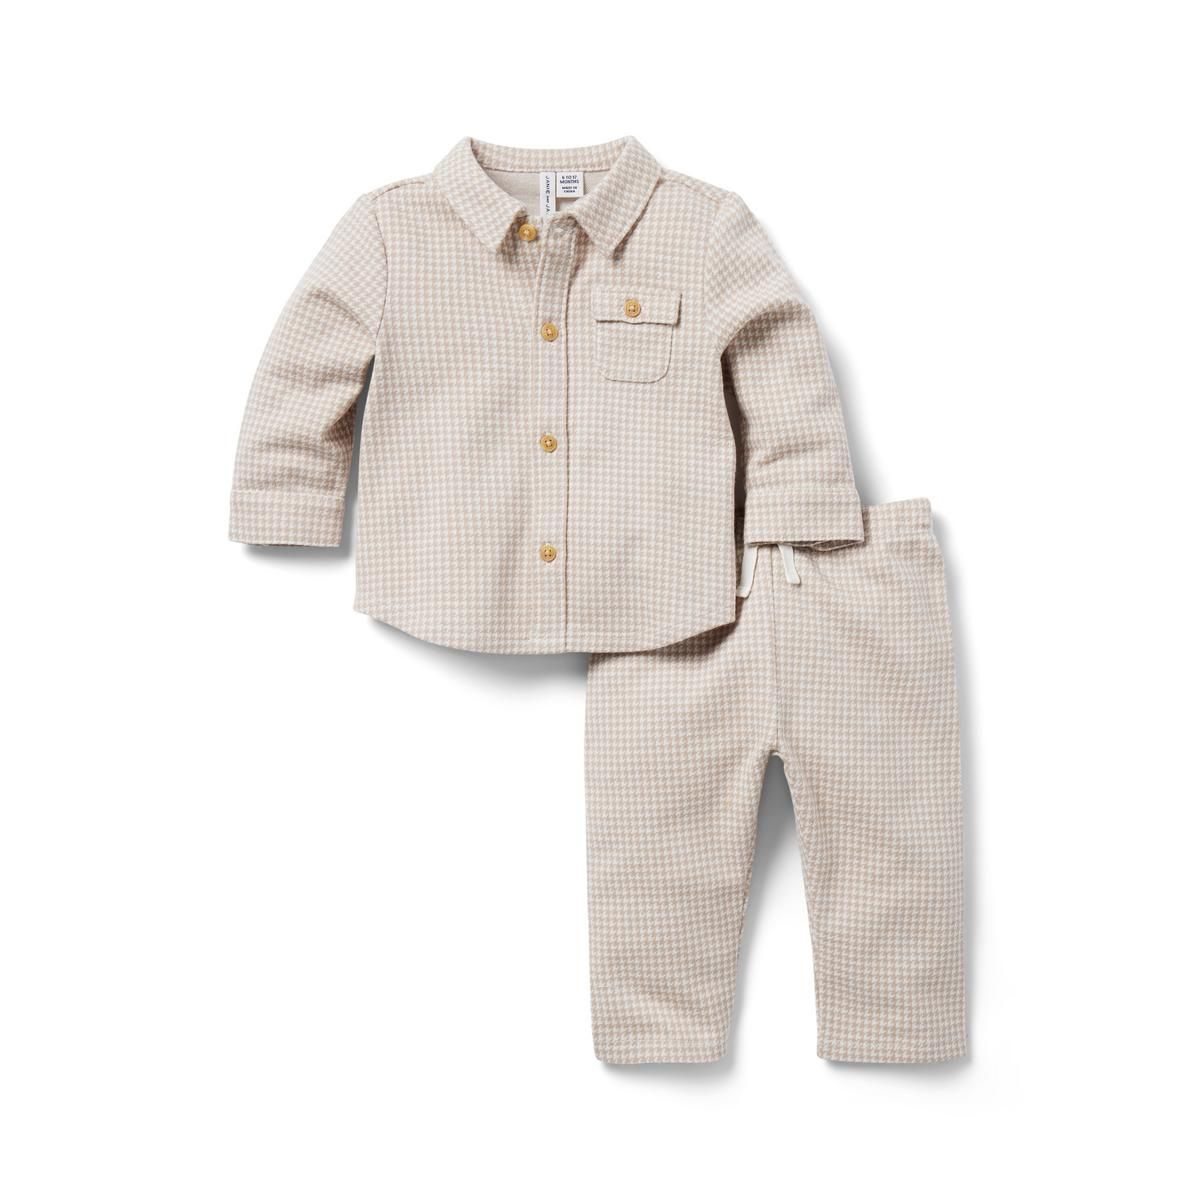 Baby Houndstooth Matching Set | Janie and Jack